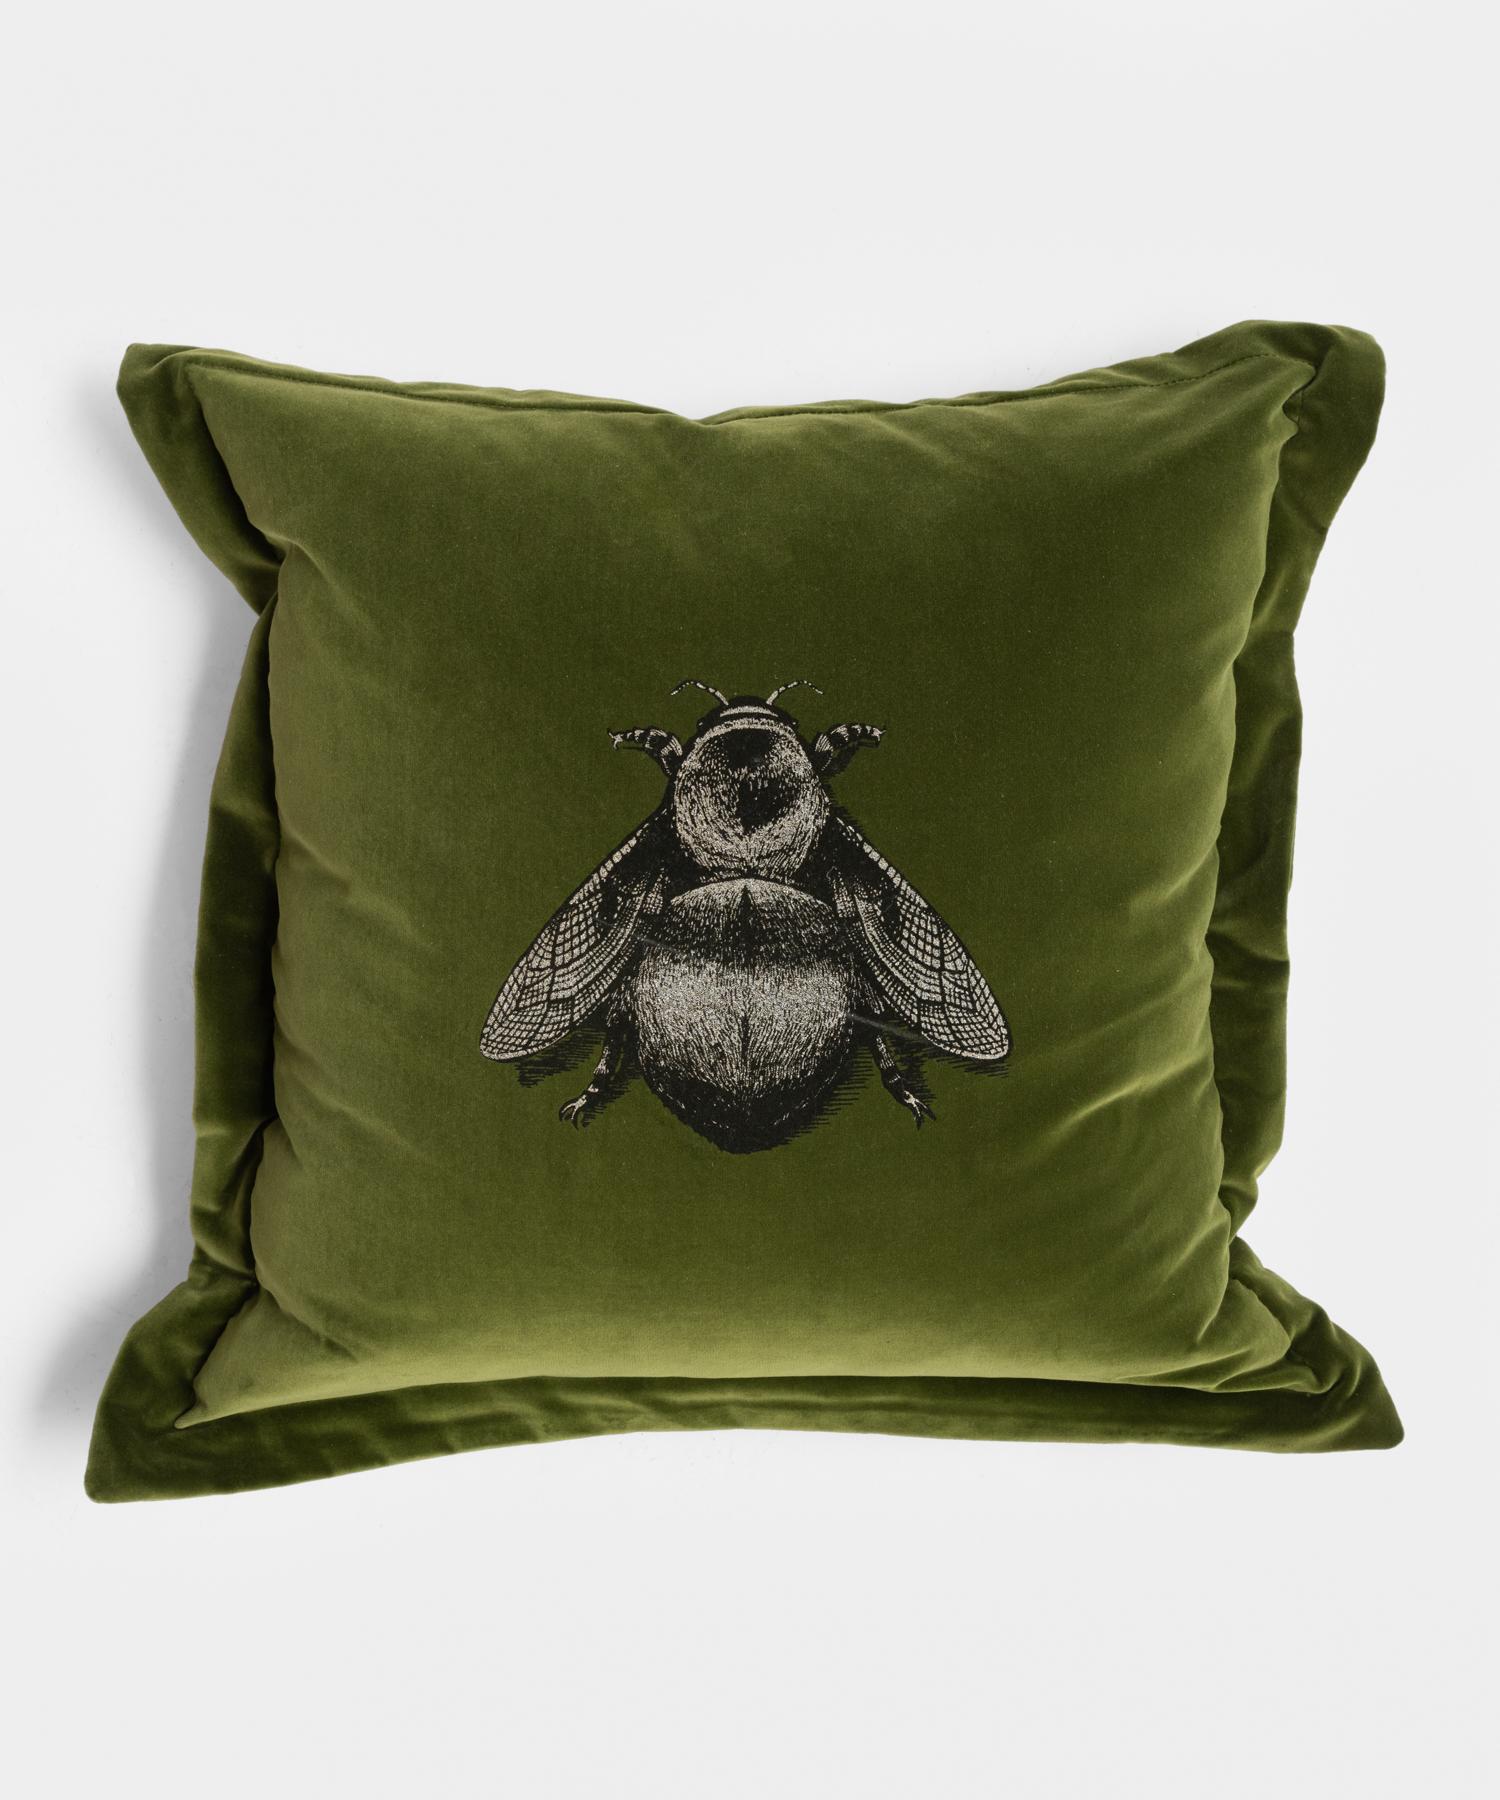 Olive Napoleon Bee cushion by Timorous Beasties

100% cotton pile with embroidered bee design in metallic thread. Also available in crimson and honey.